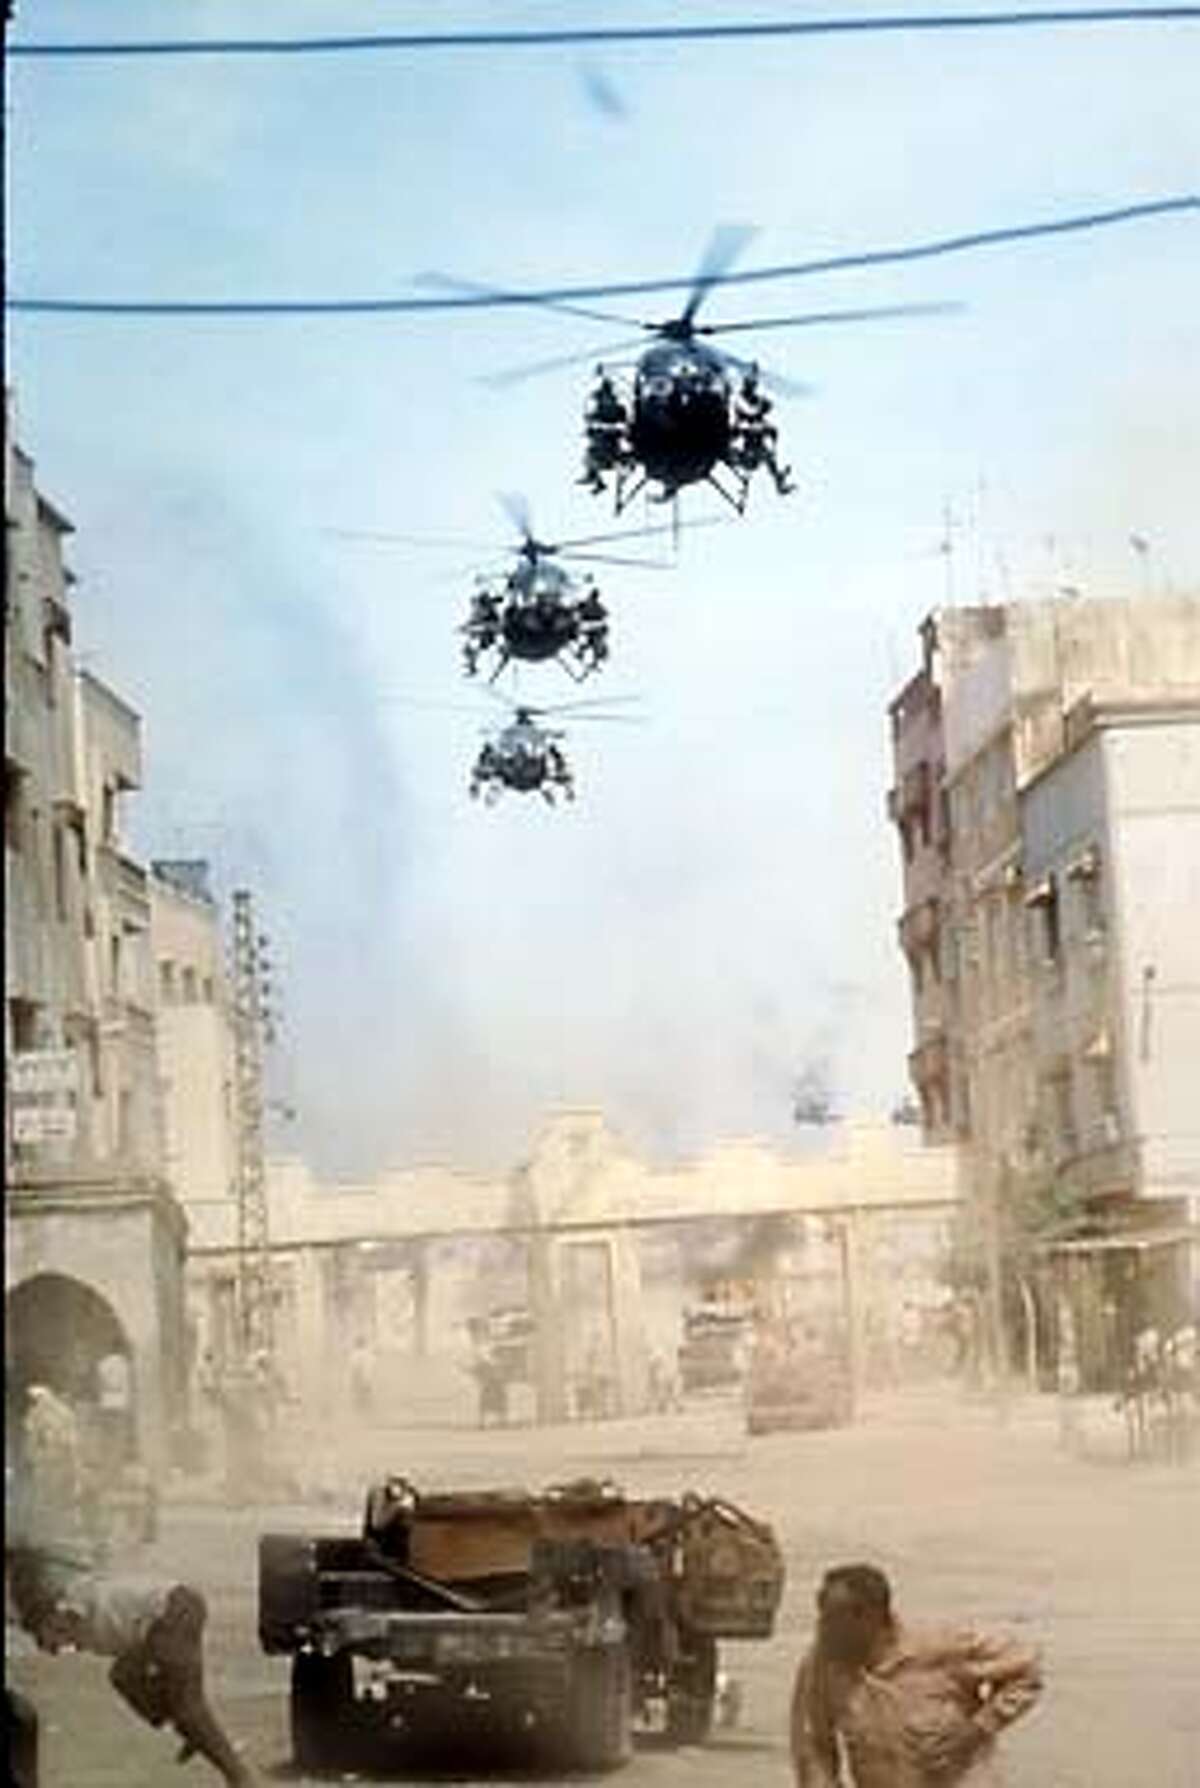 American soldiers arrive in Mogadishu in black hawk and Little bird helicopters in the Columbia Pictures film Blackhawk Down. HANDOUT.